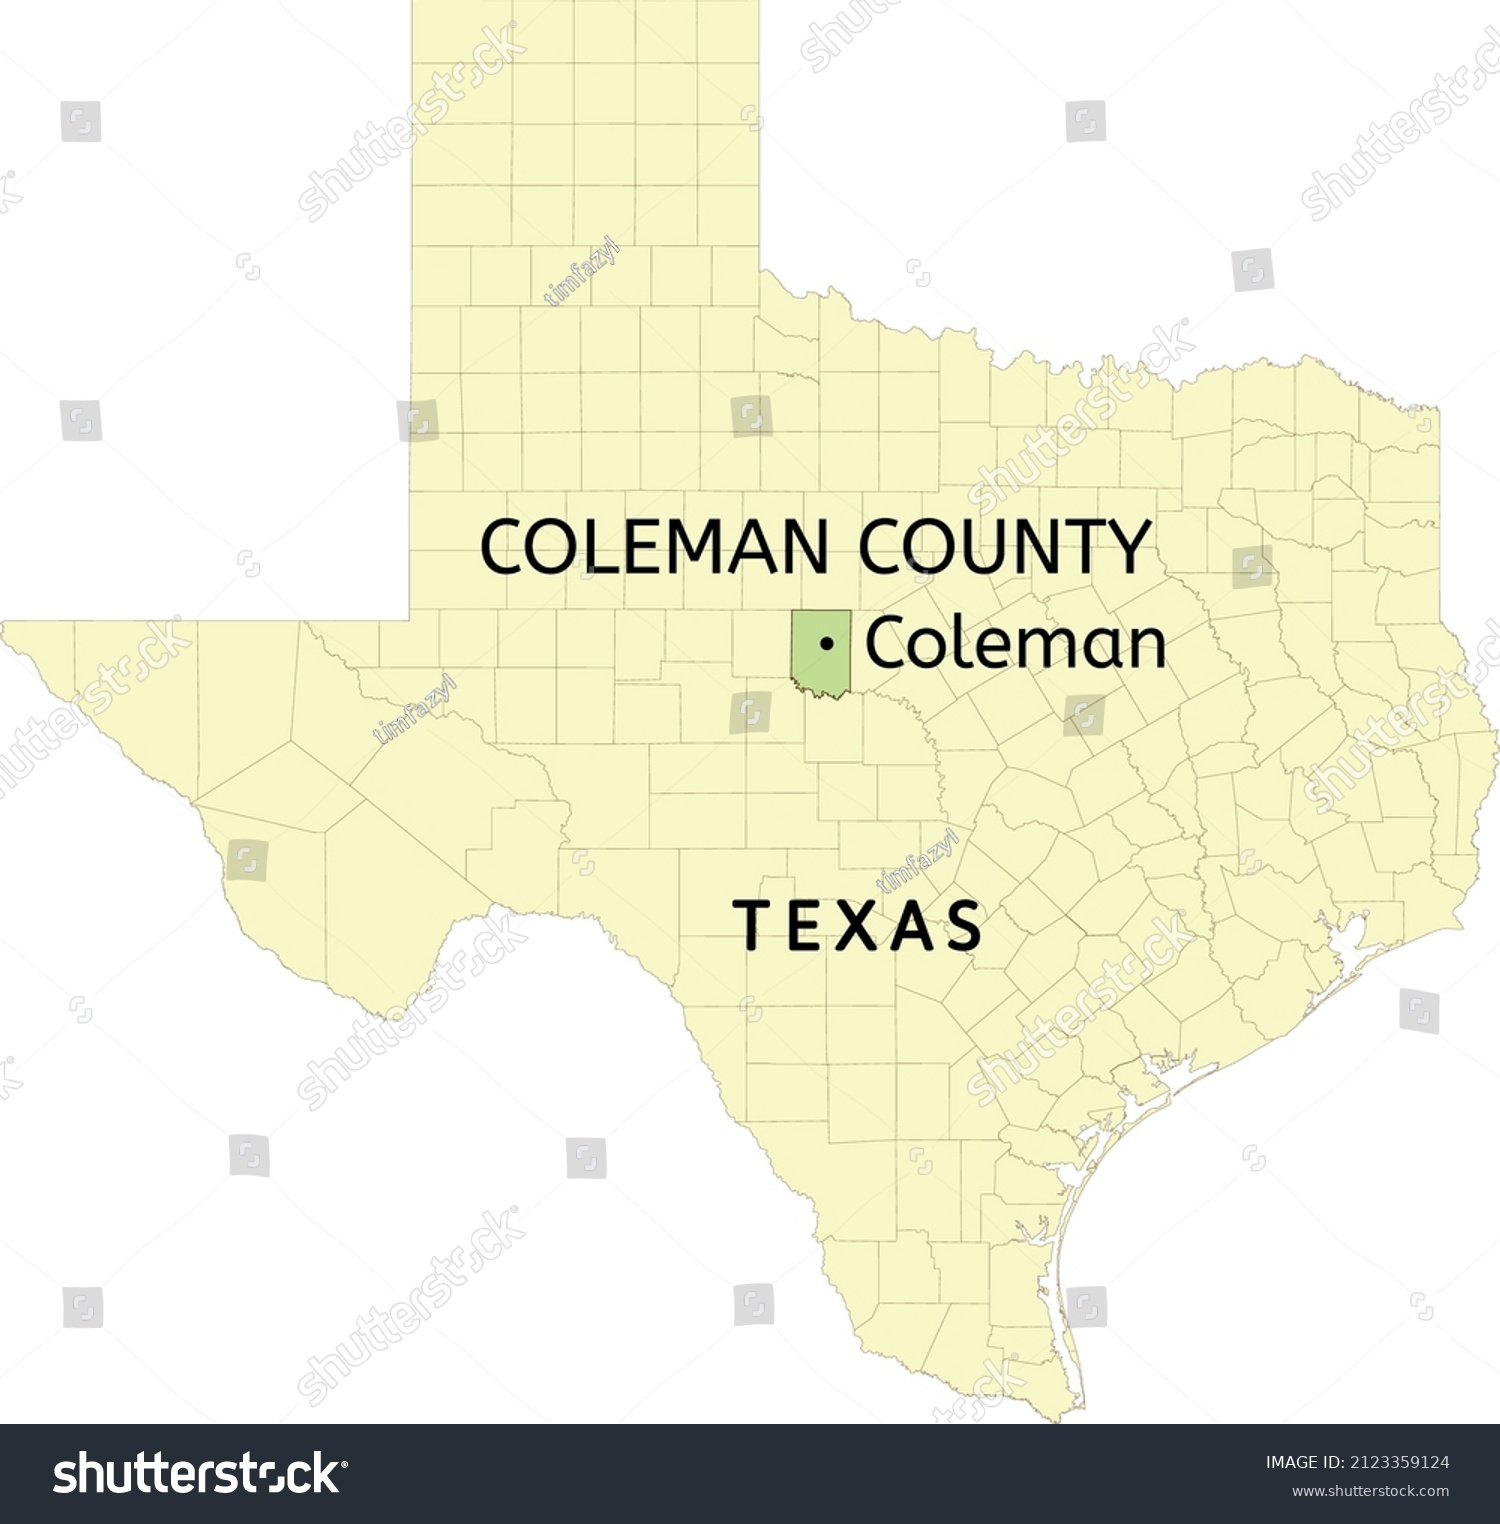 SVG of Coleman County and city of Coleman location on Texas state map svg